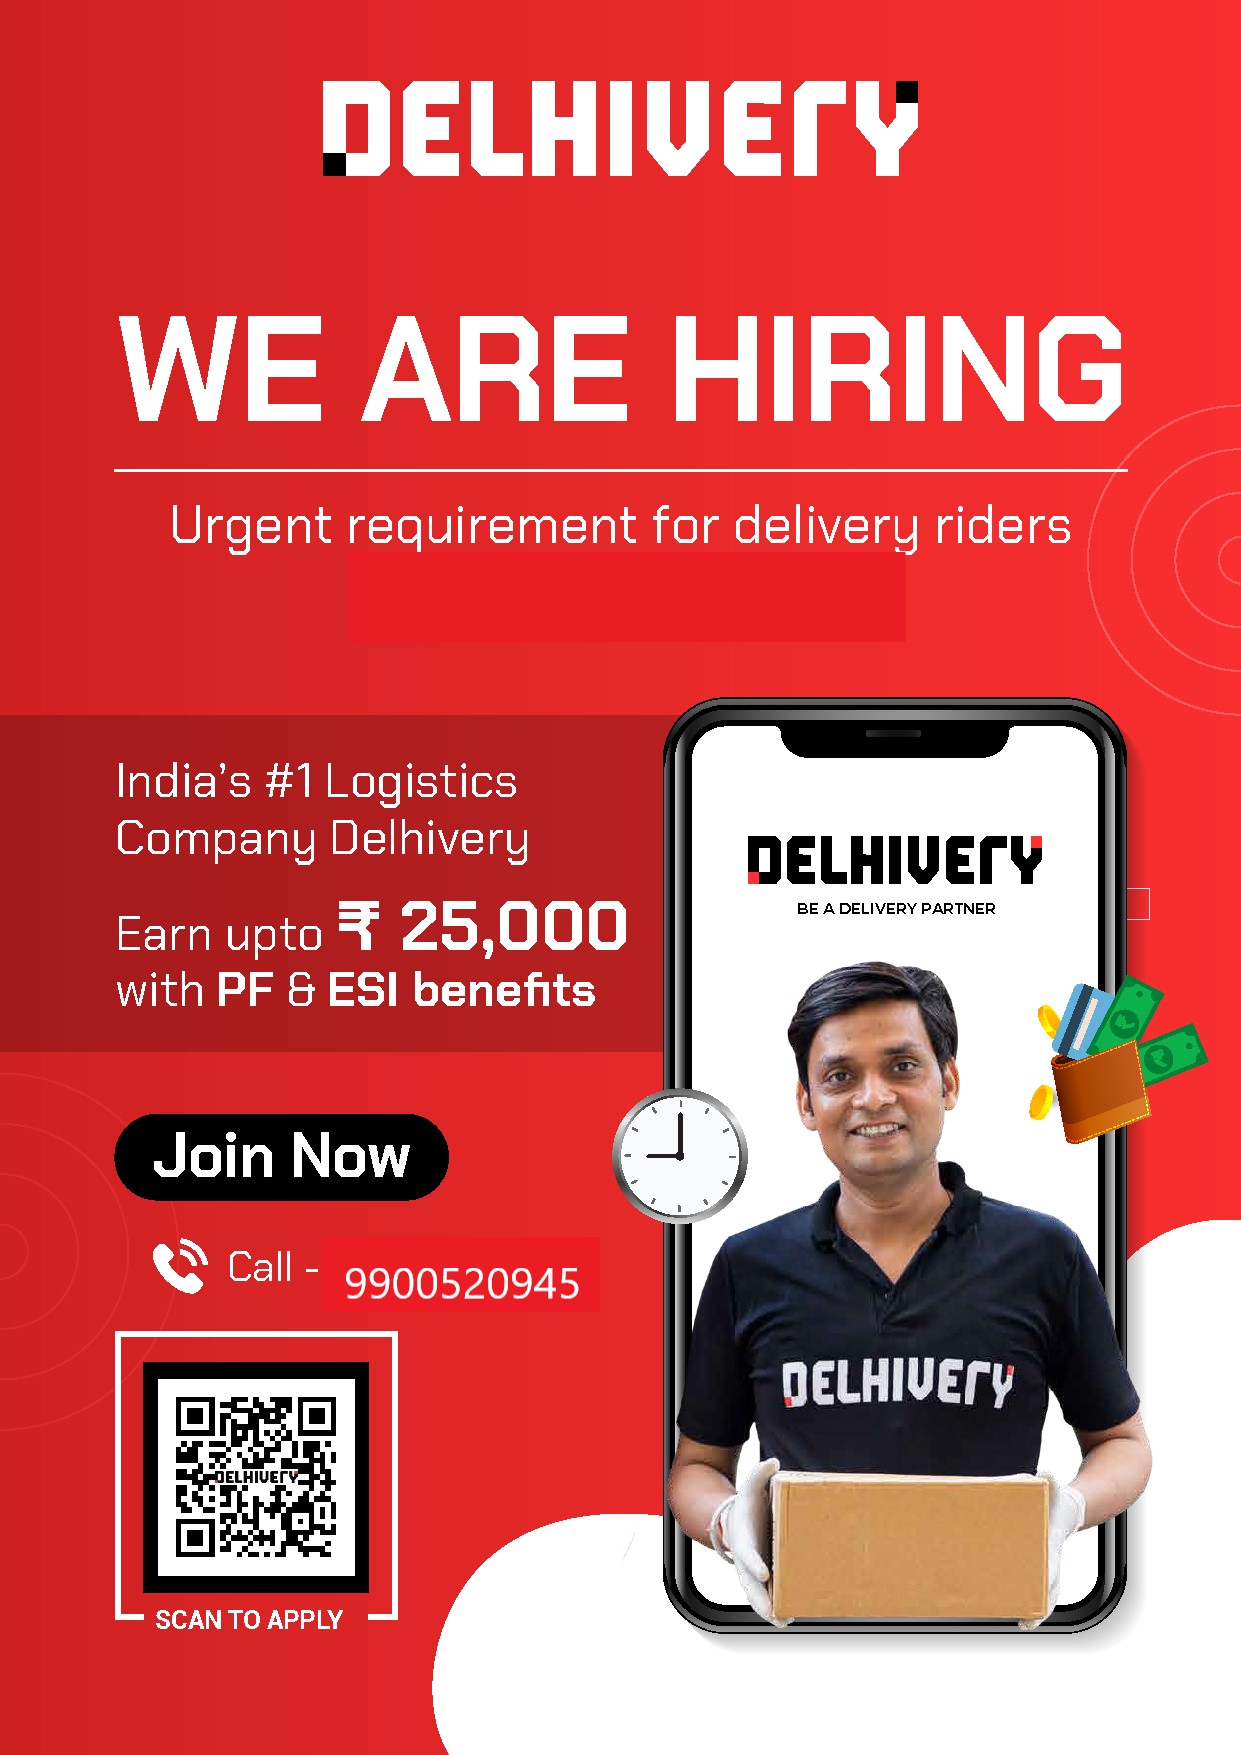 DELHIVETY
WE ARE HIRING

Urgent requirement for delivery riders

   

India’s #1 Logistics
Company Delhivery

Earn upto I 25,000
with PF & ESI benefits

     

DELHIVErY

BE A DELIVERY PARTNER

    
 
 

Join Now

NY
RT EP CY 15

   

SCAN TO APPLY